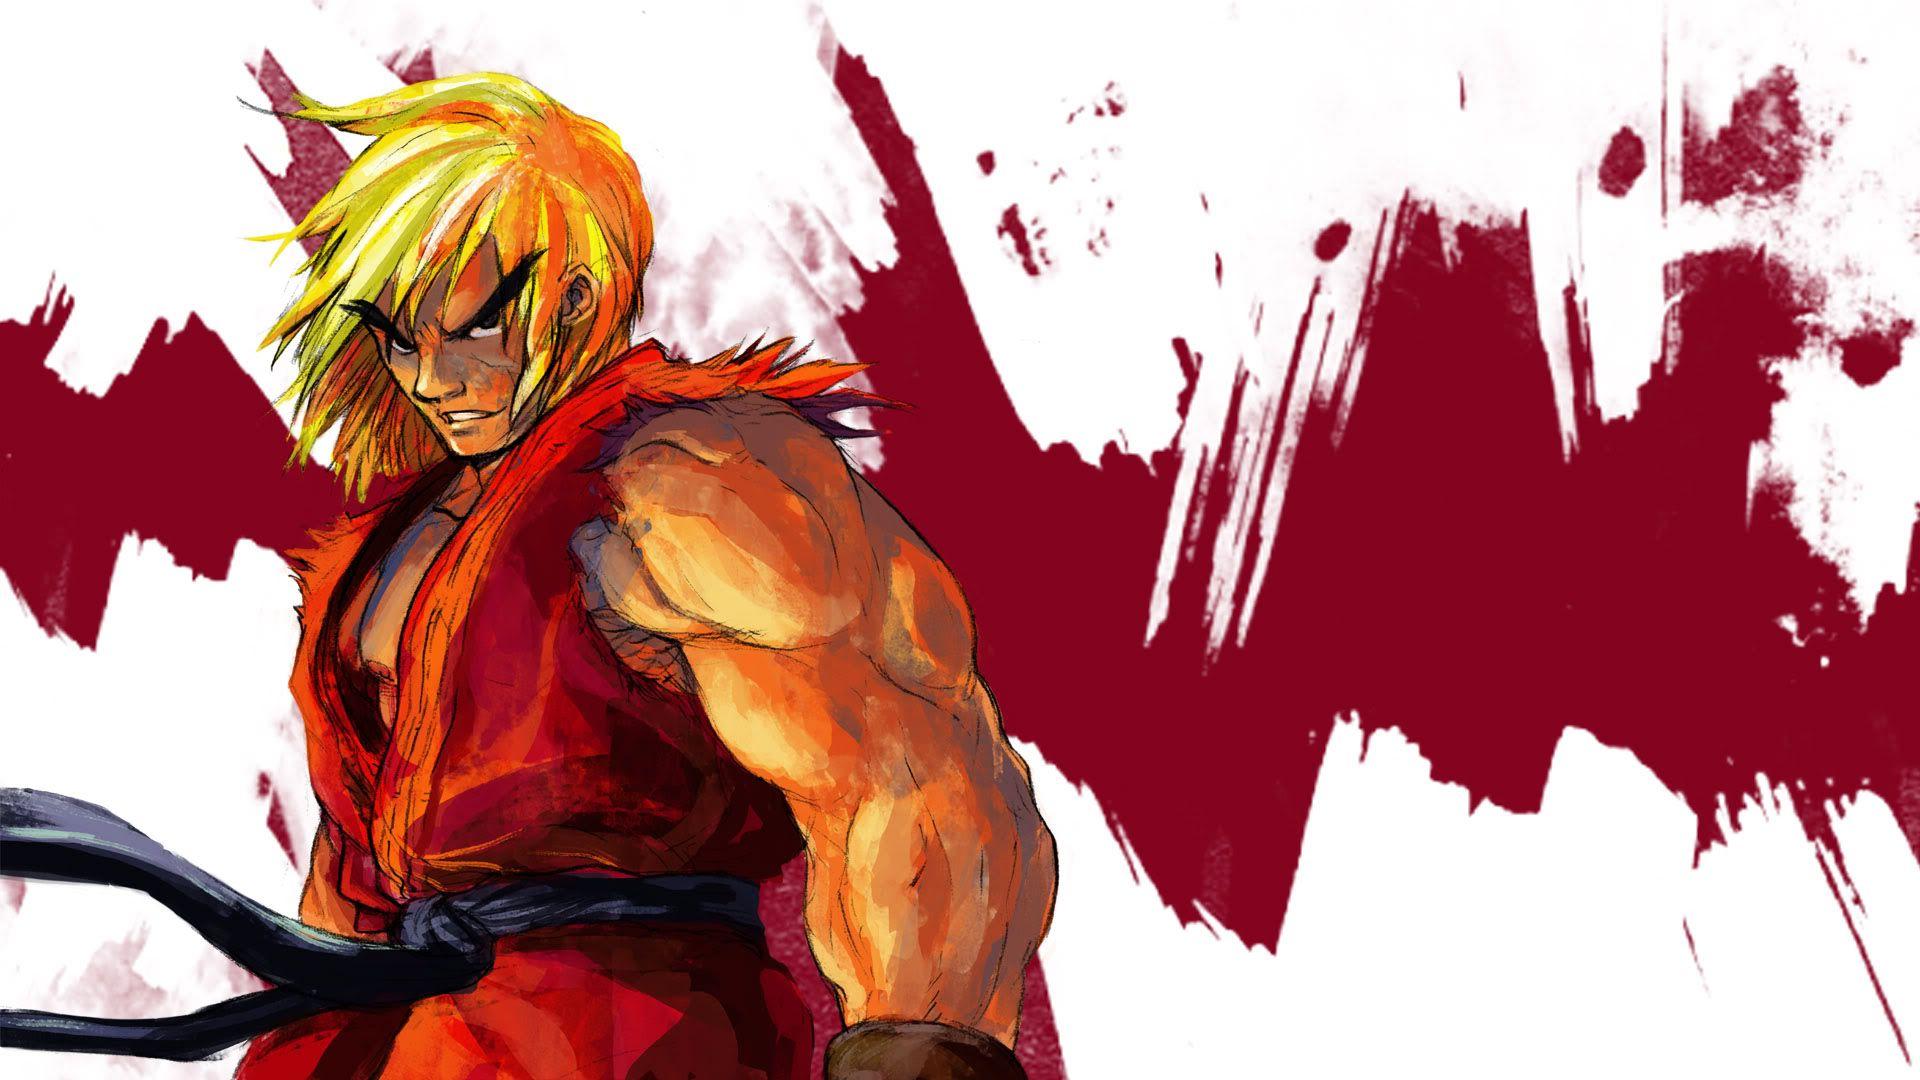 New Street Fighter Ken Photo and Picture, Street Fighter Ken